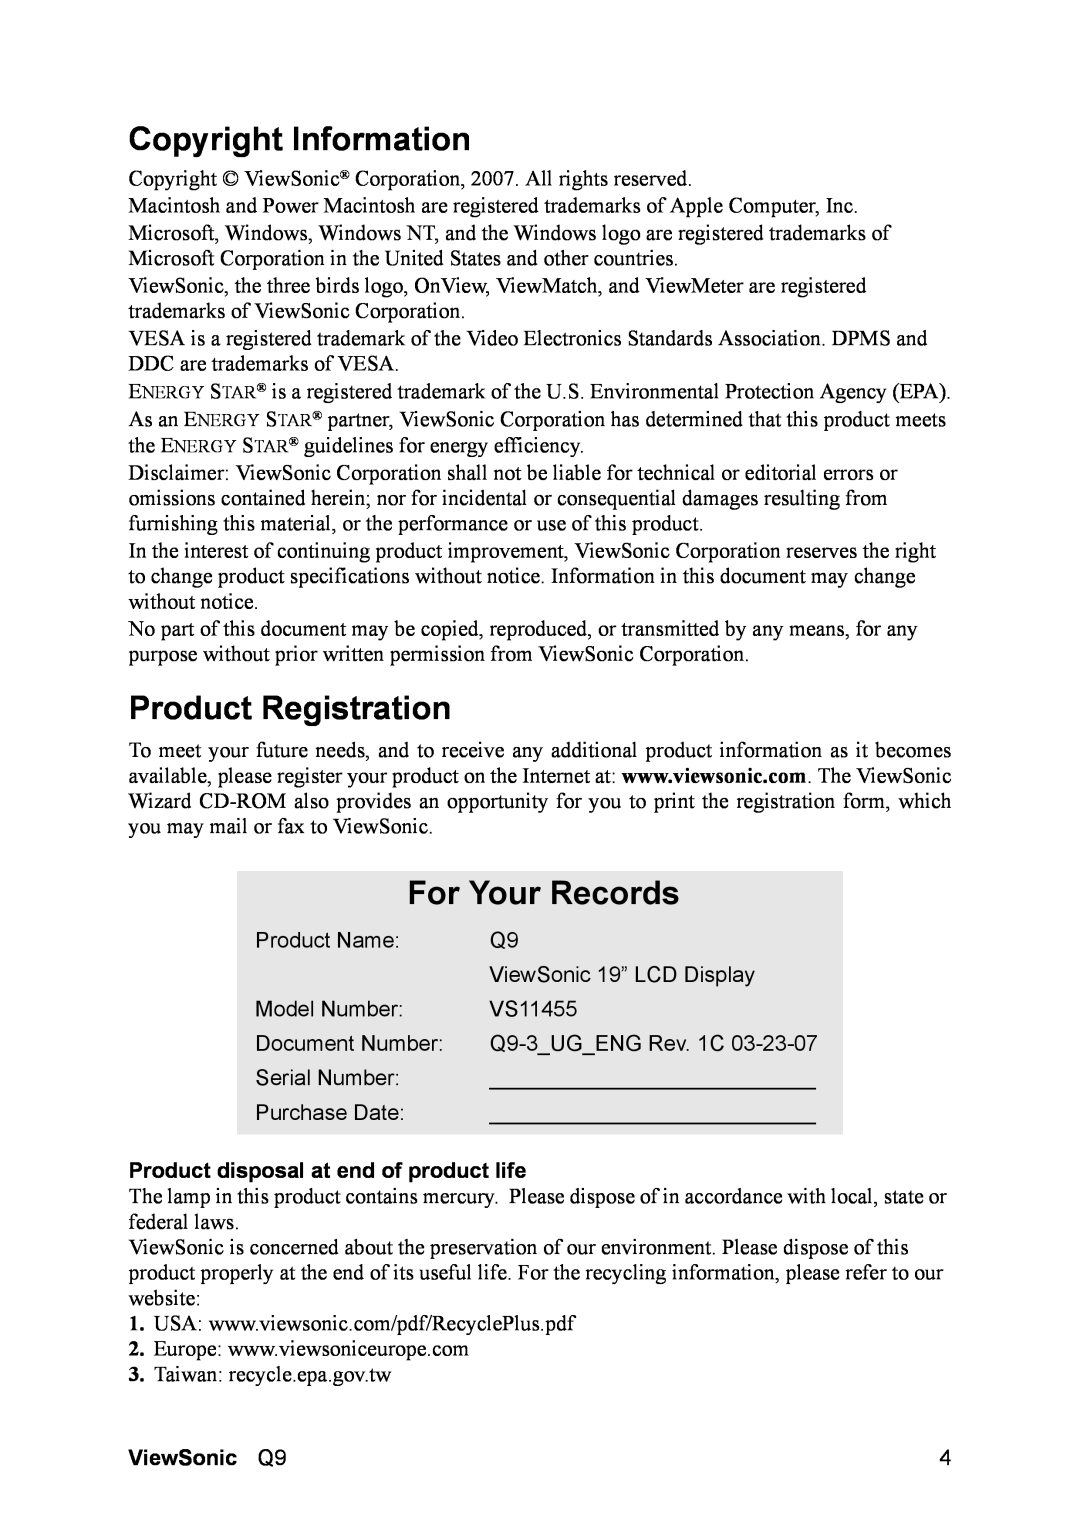 ViewSonic Q9B manual Copyright Information, Product Registration, For Your Records, Product disposal at end of product life 